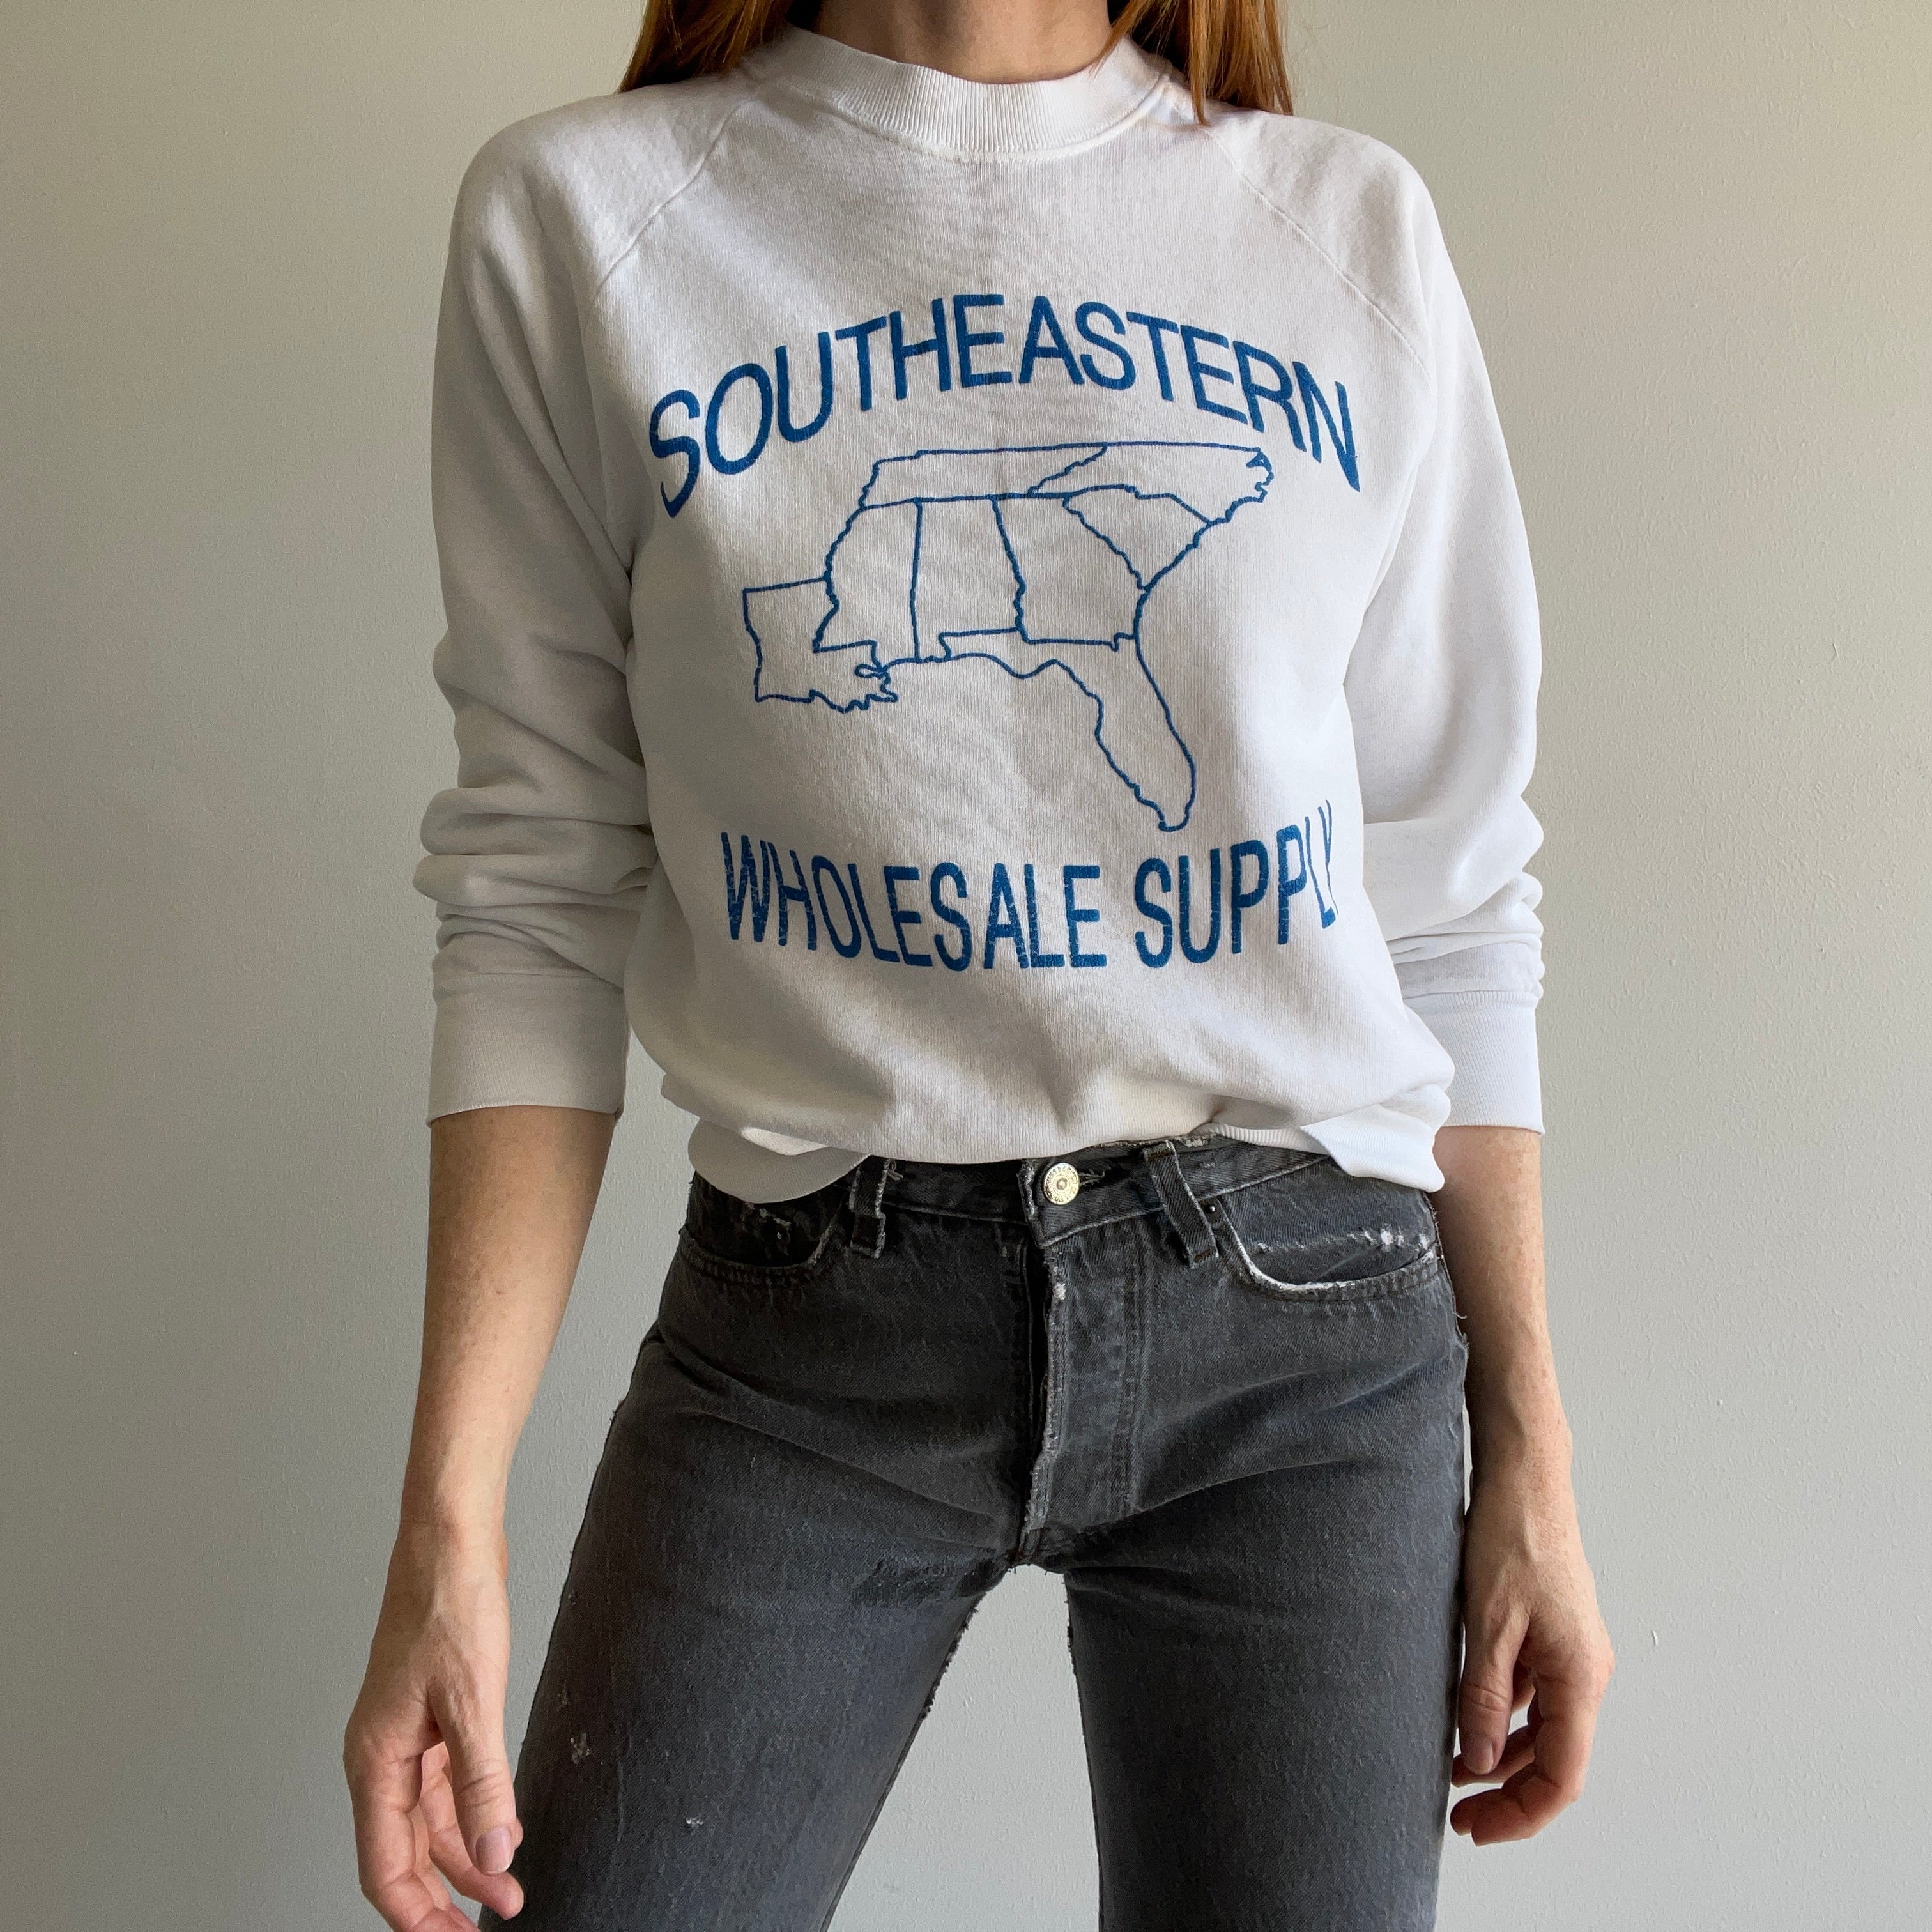 1980s Southeastern Wholesale Supply Thinned Out Screen Stars Sweatshirt